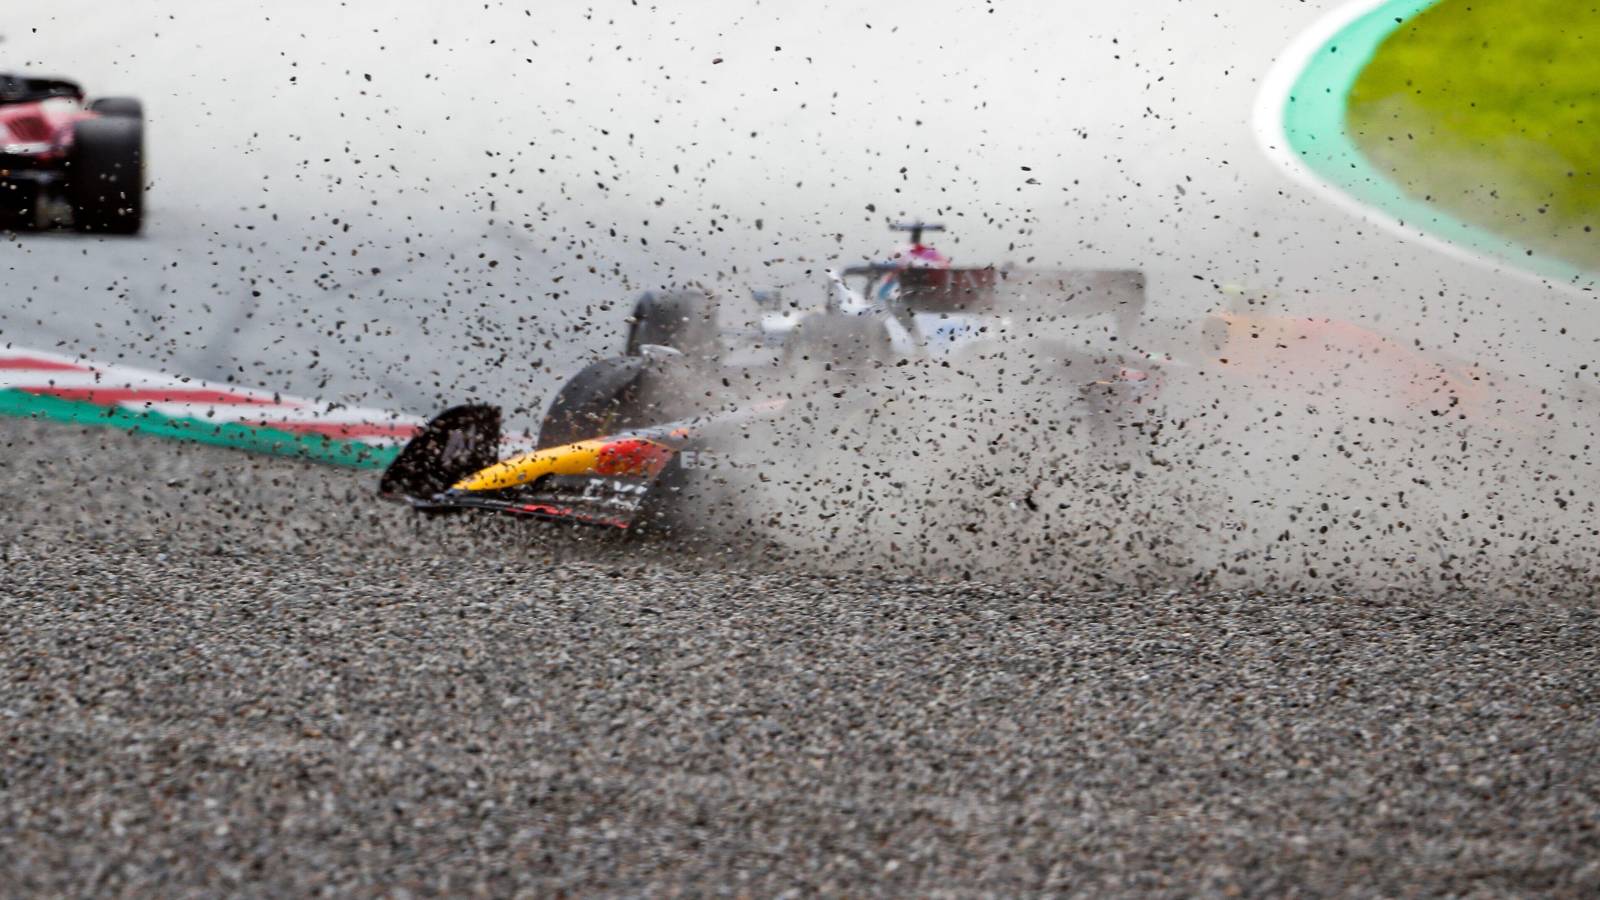 Sergio Perez, Red Bull, slides through the gravel after contact with George Russell, Mercedes. Austria, July 2022.